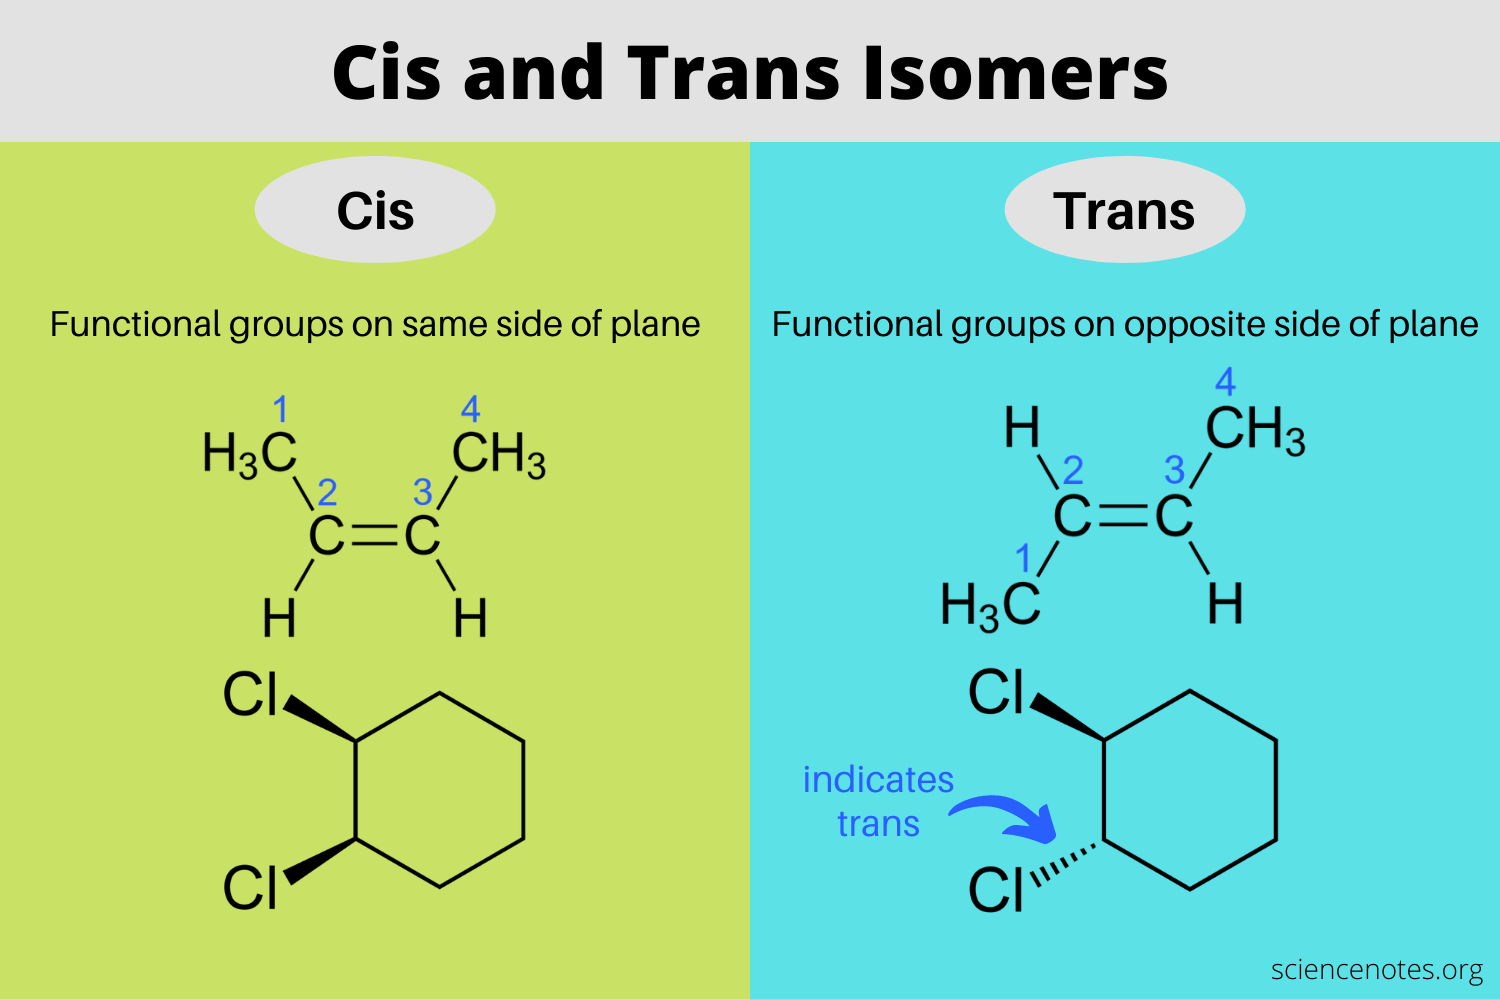 lors on Twitter: "they turned chemistry into a pronoun https://t.co/MZ...